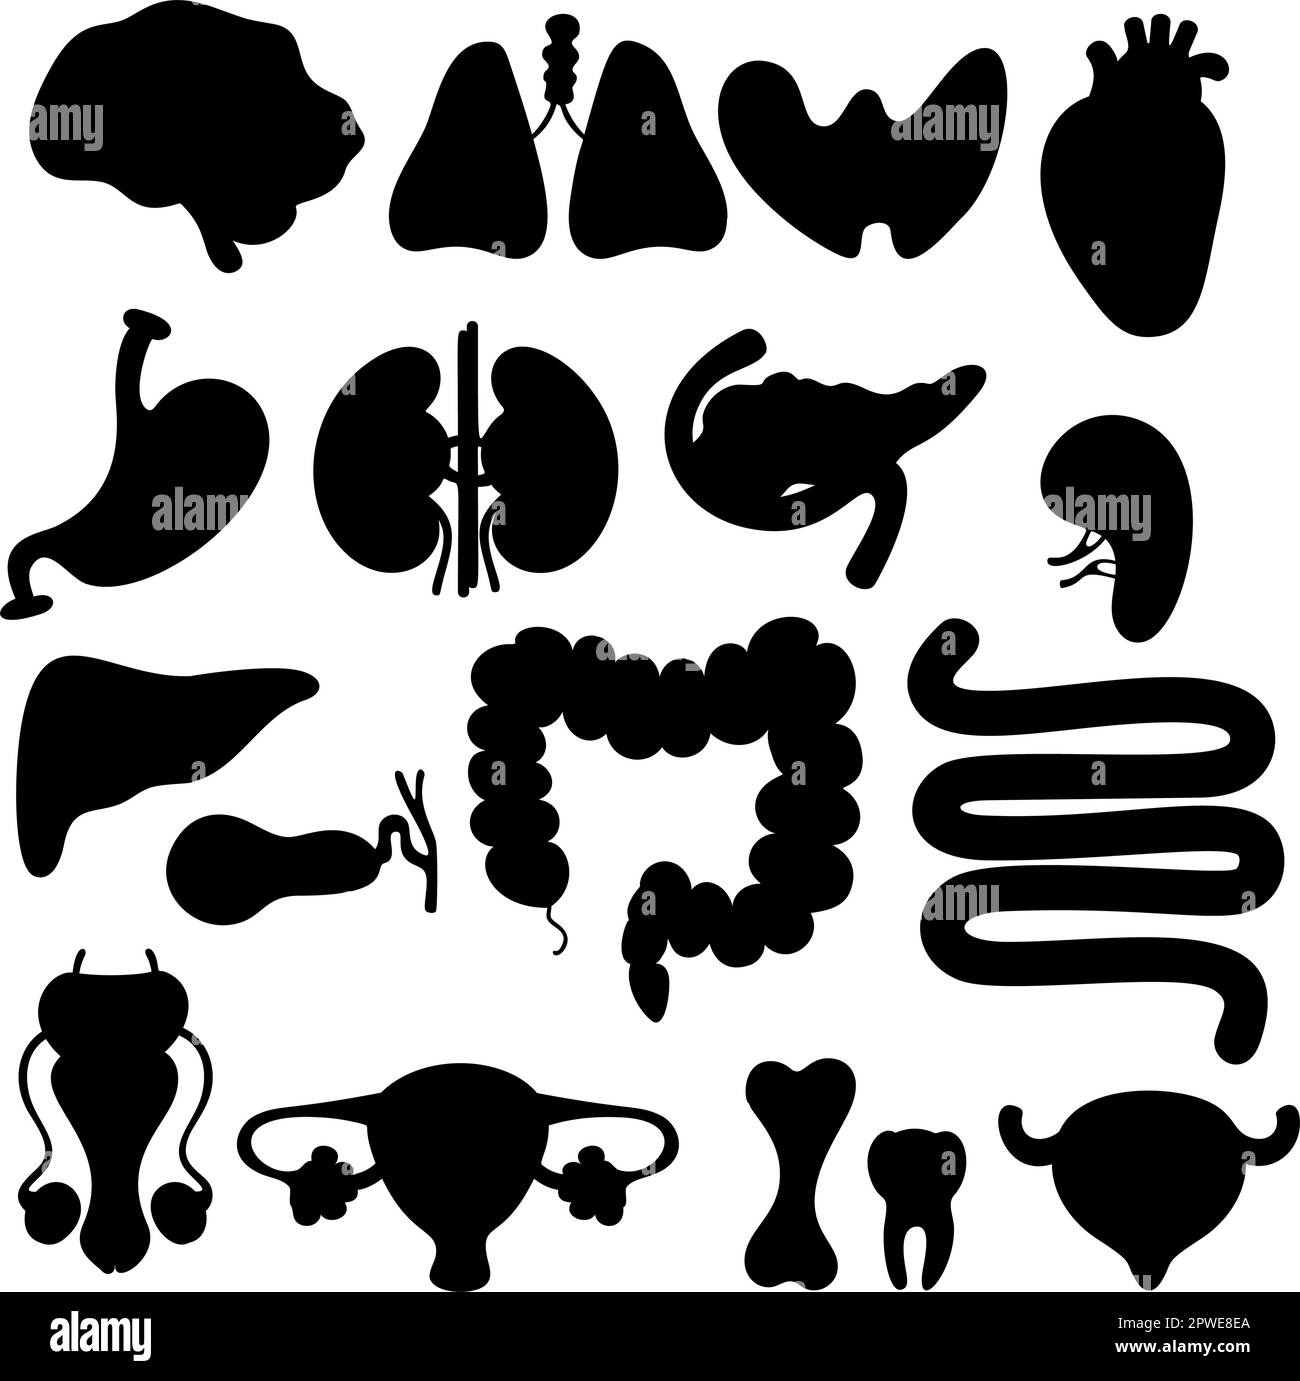 Collection medical organs silhouettes. Human internal organs. vector illustration. Anatomy concept. Isolated graphic drawings silhouettes for design, Stock Vector